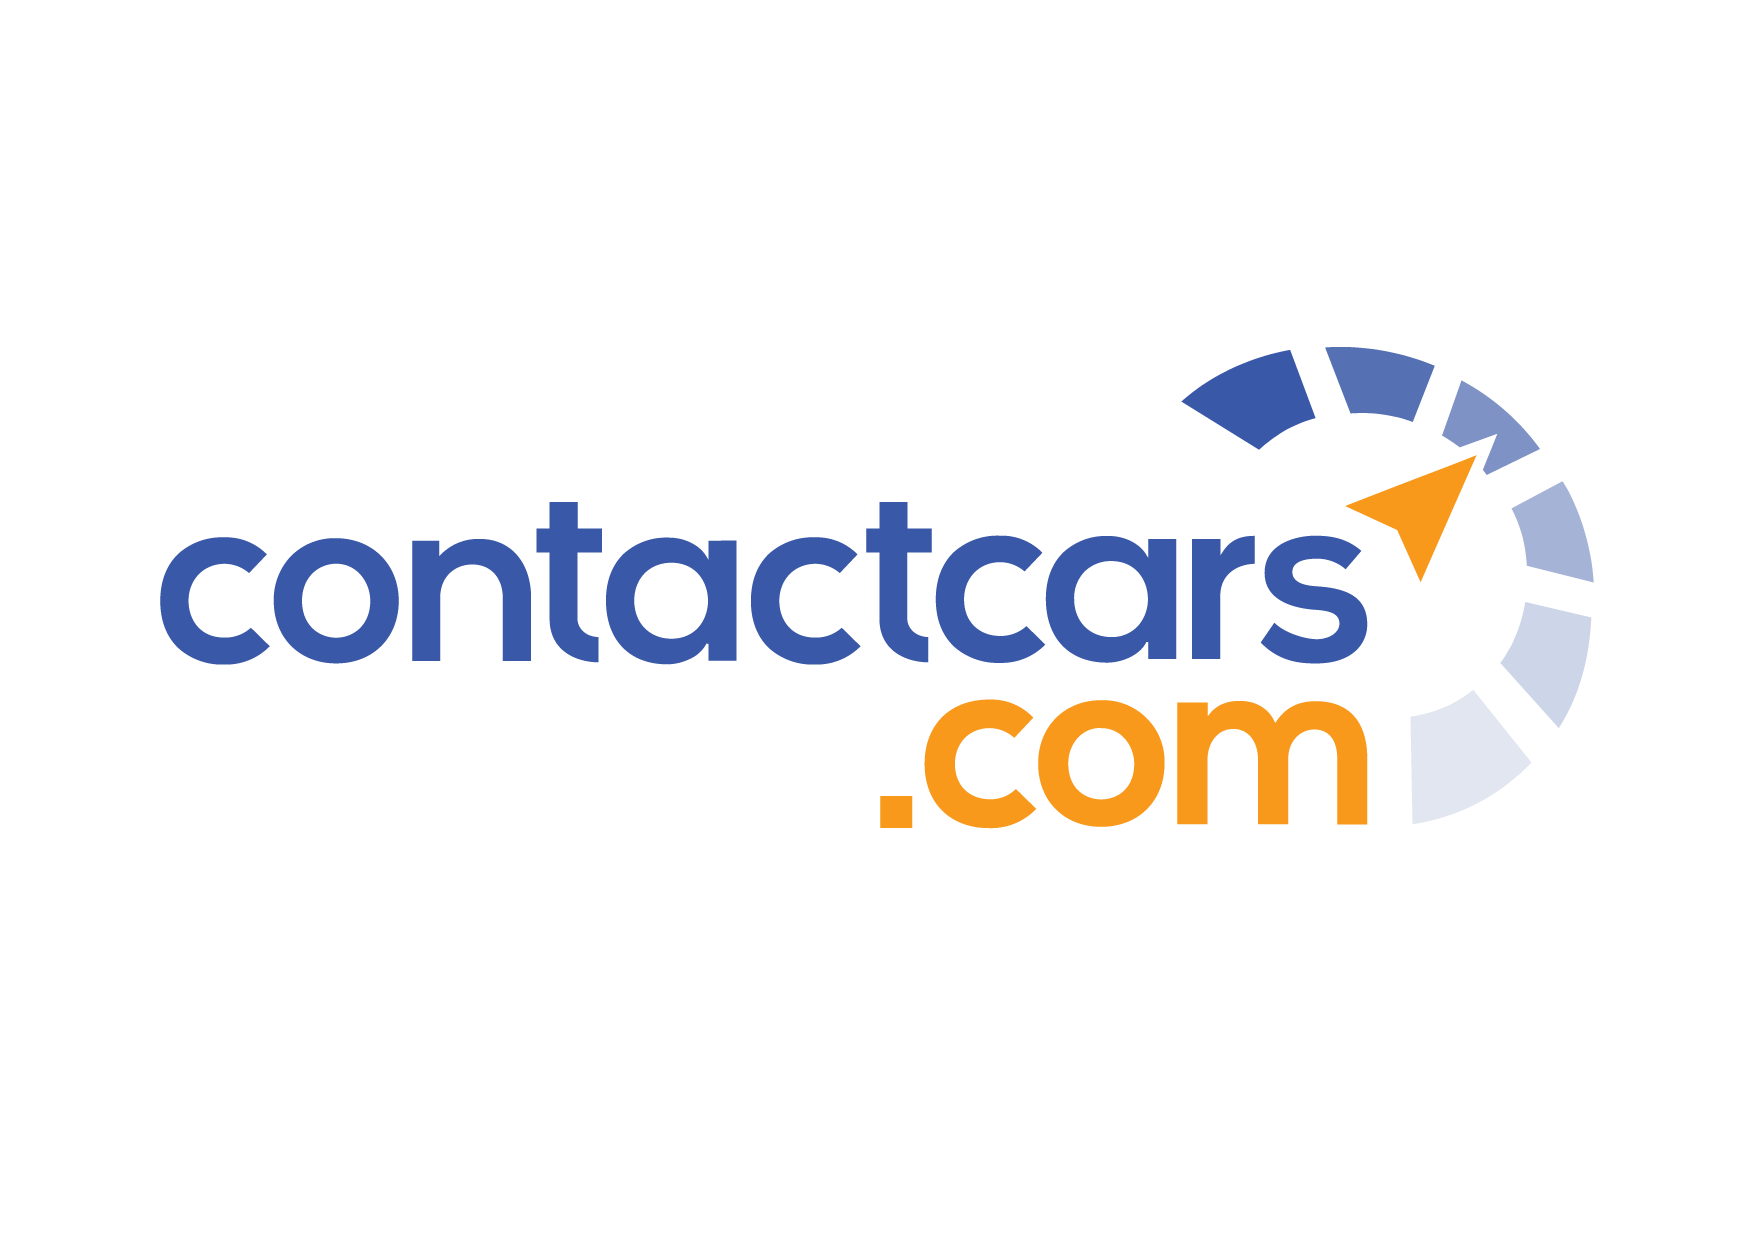 Contract Cars